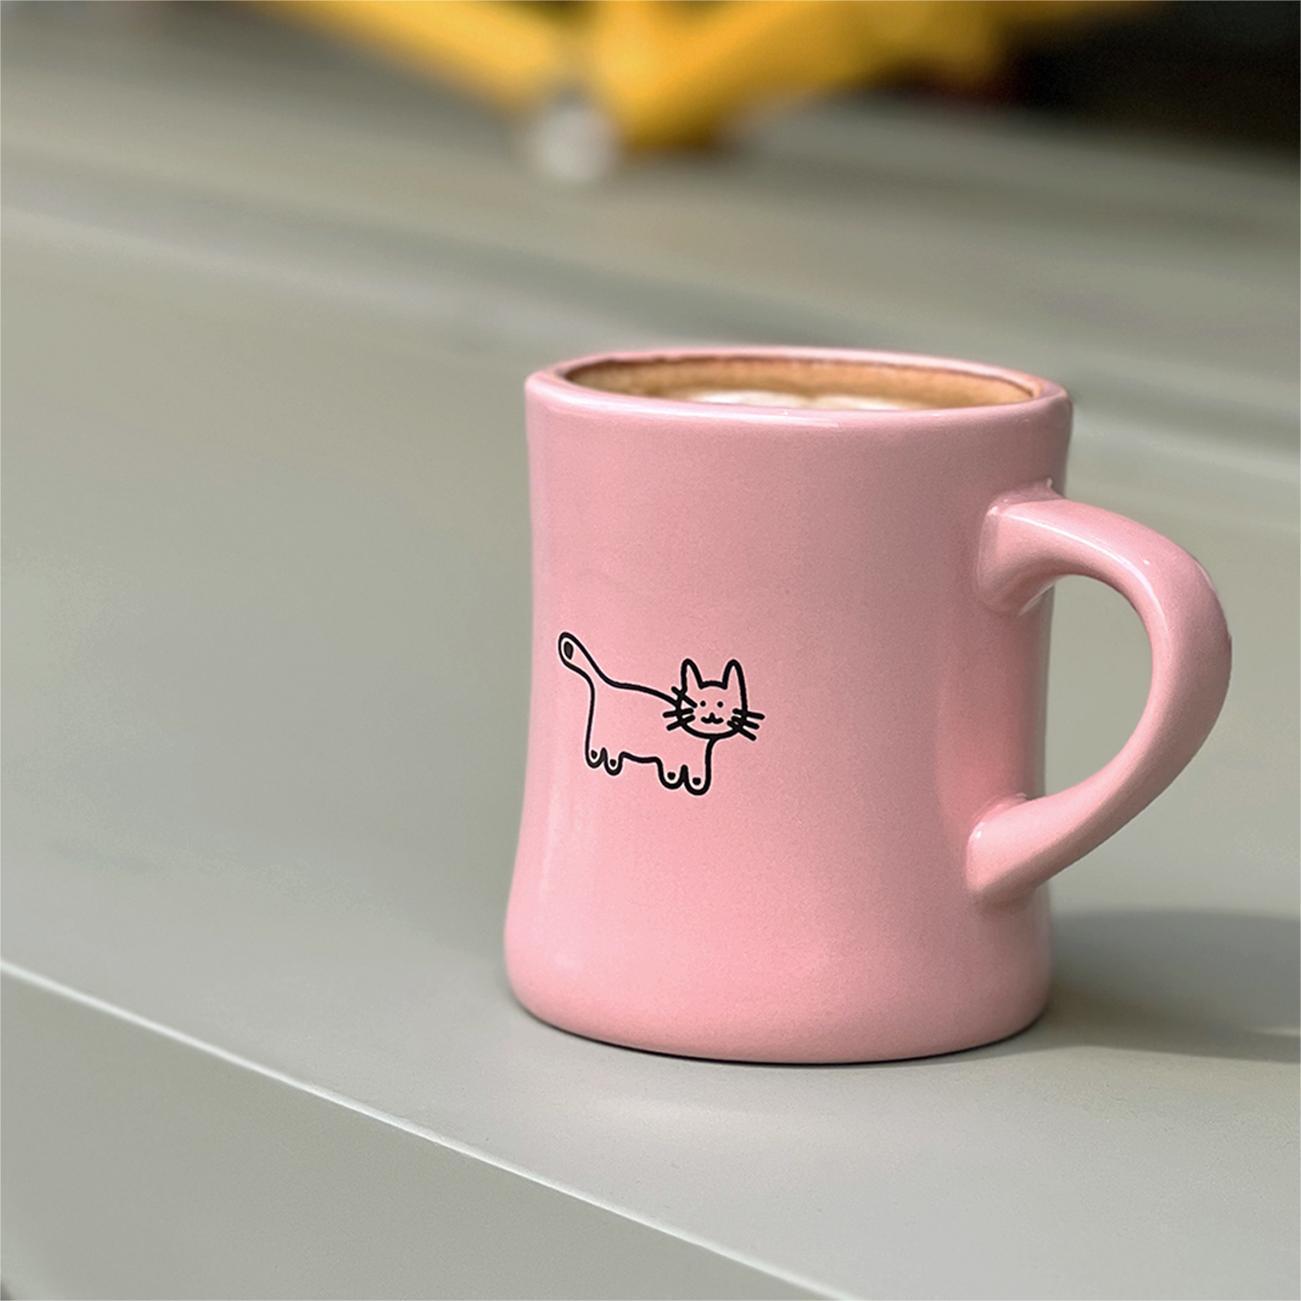 Aimer Pink Love Yourself Coffee Mug, cute cat illustration, with latte in it. Pawsome Gift for Cat Lovers and Cat Owners.